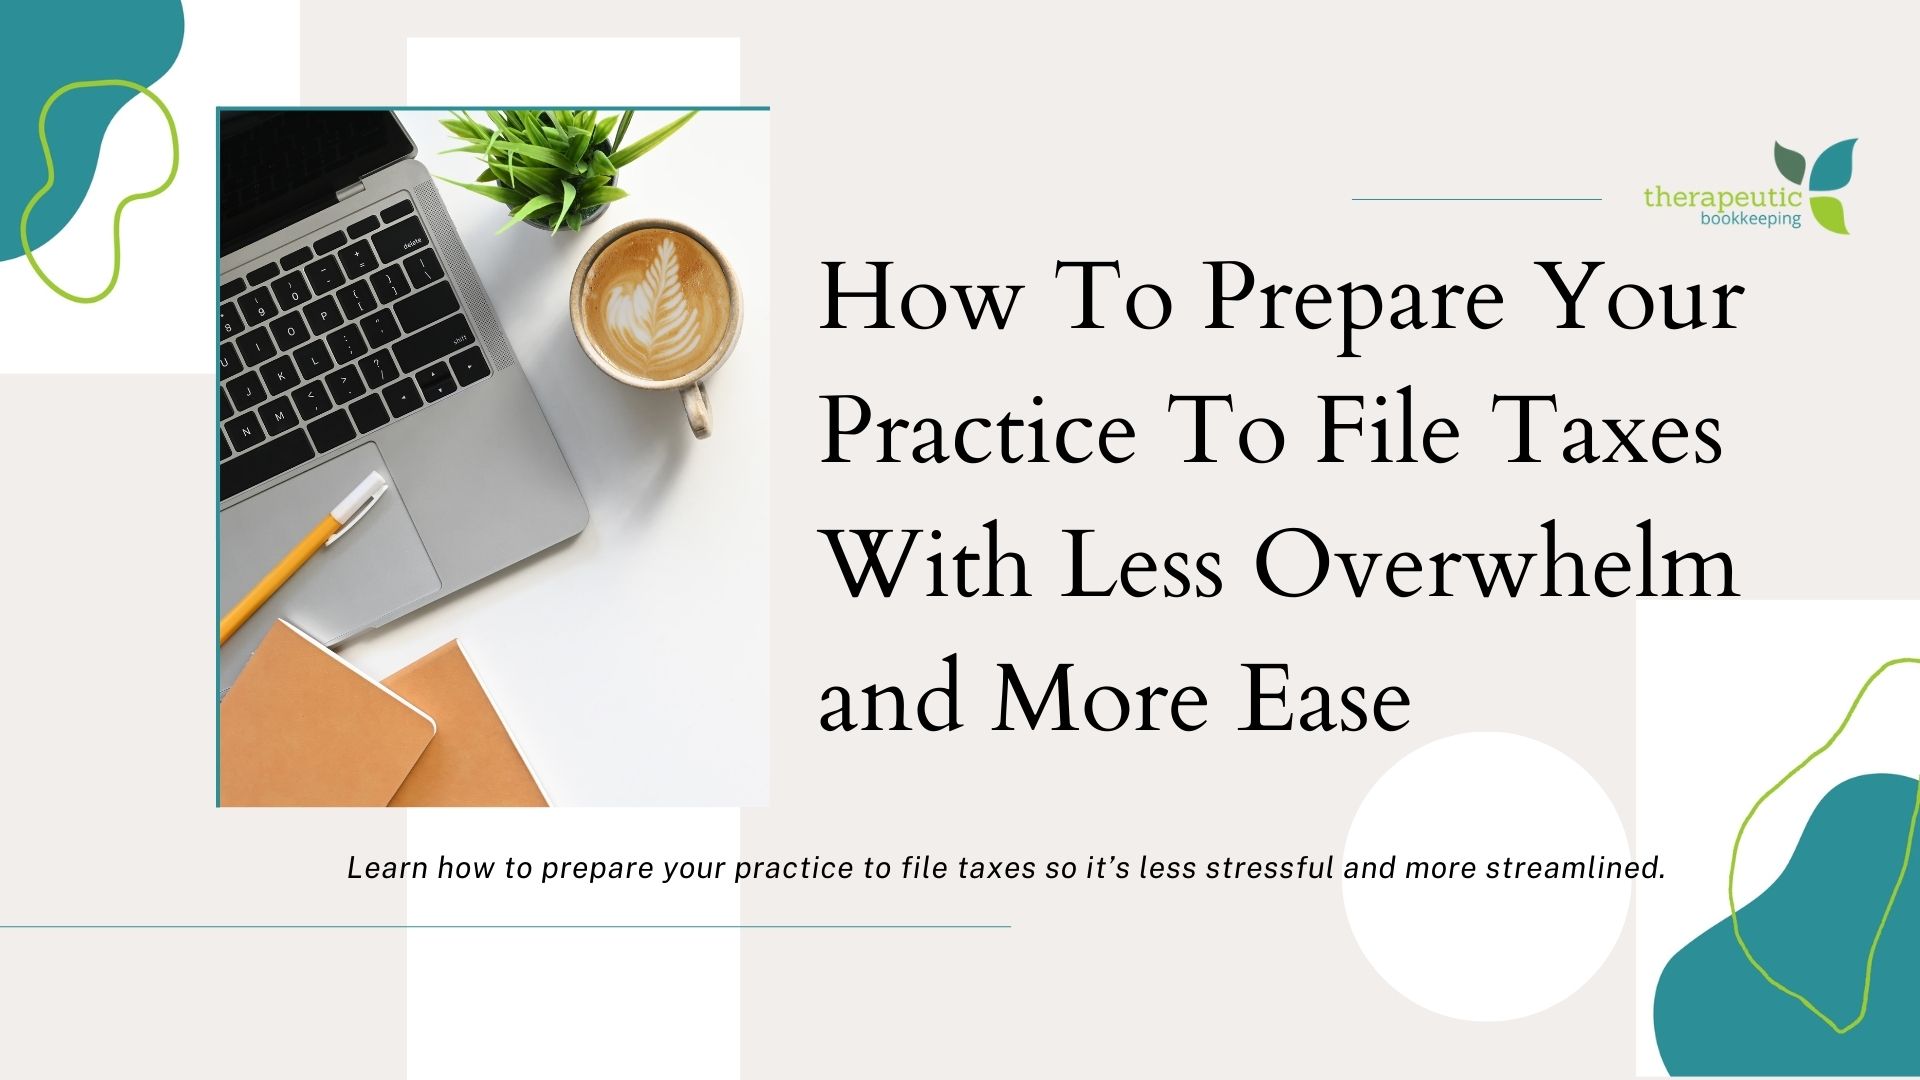 How To Prepare Your Practice To File Taxes With Less Overwhelm and More Ease